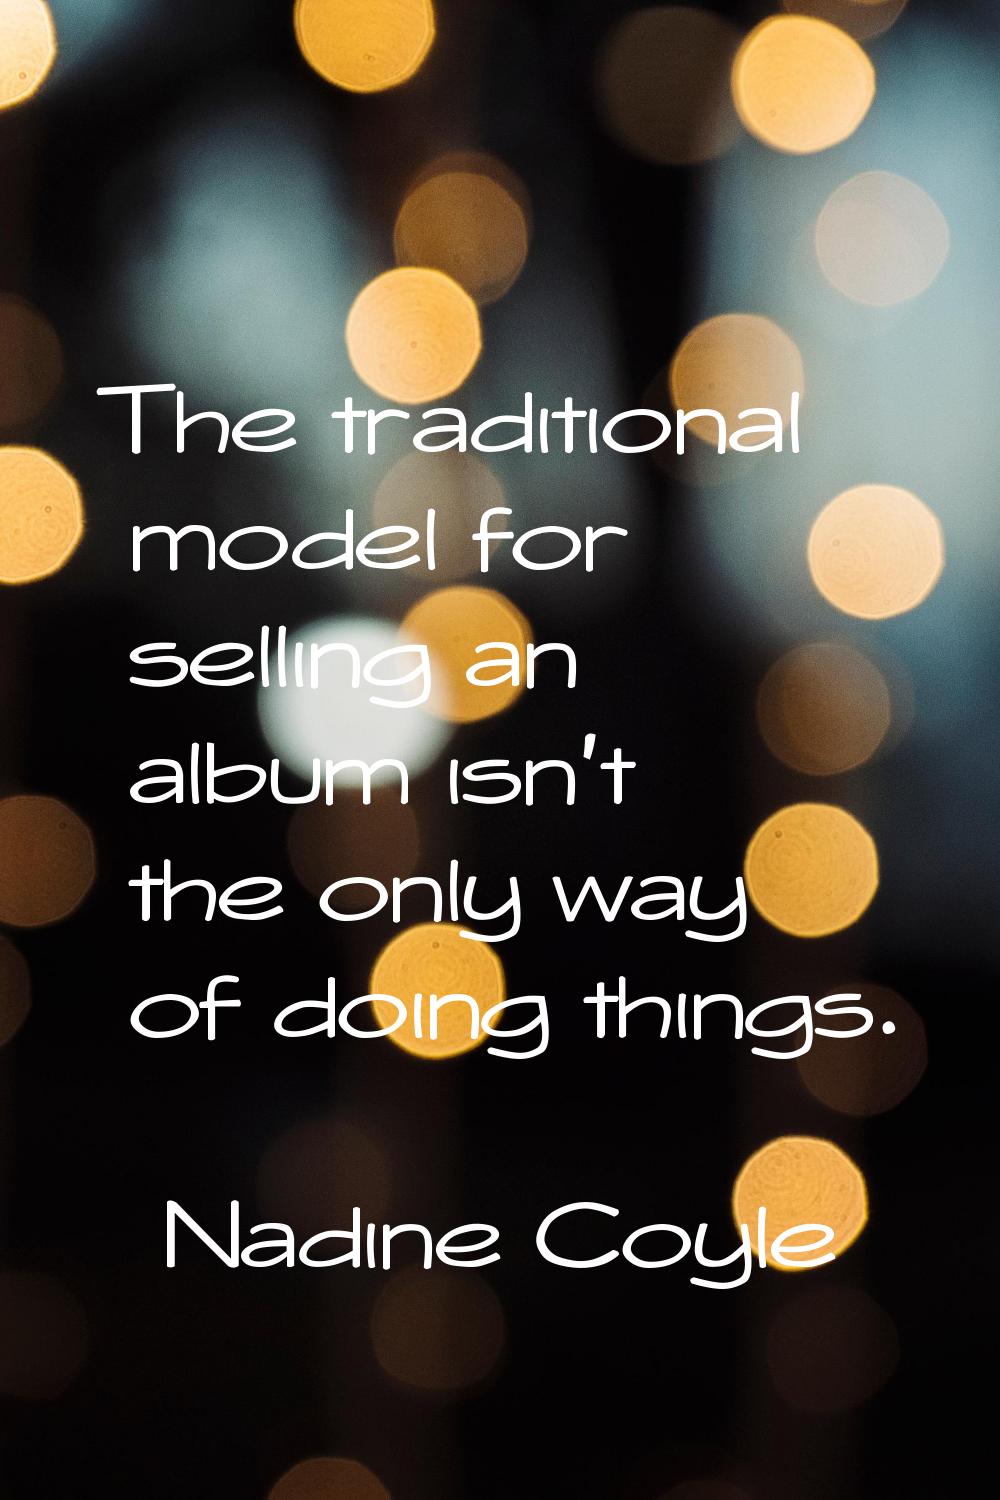 The traditional model for selling an album isn't the only way of doing things.